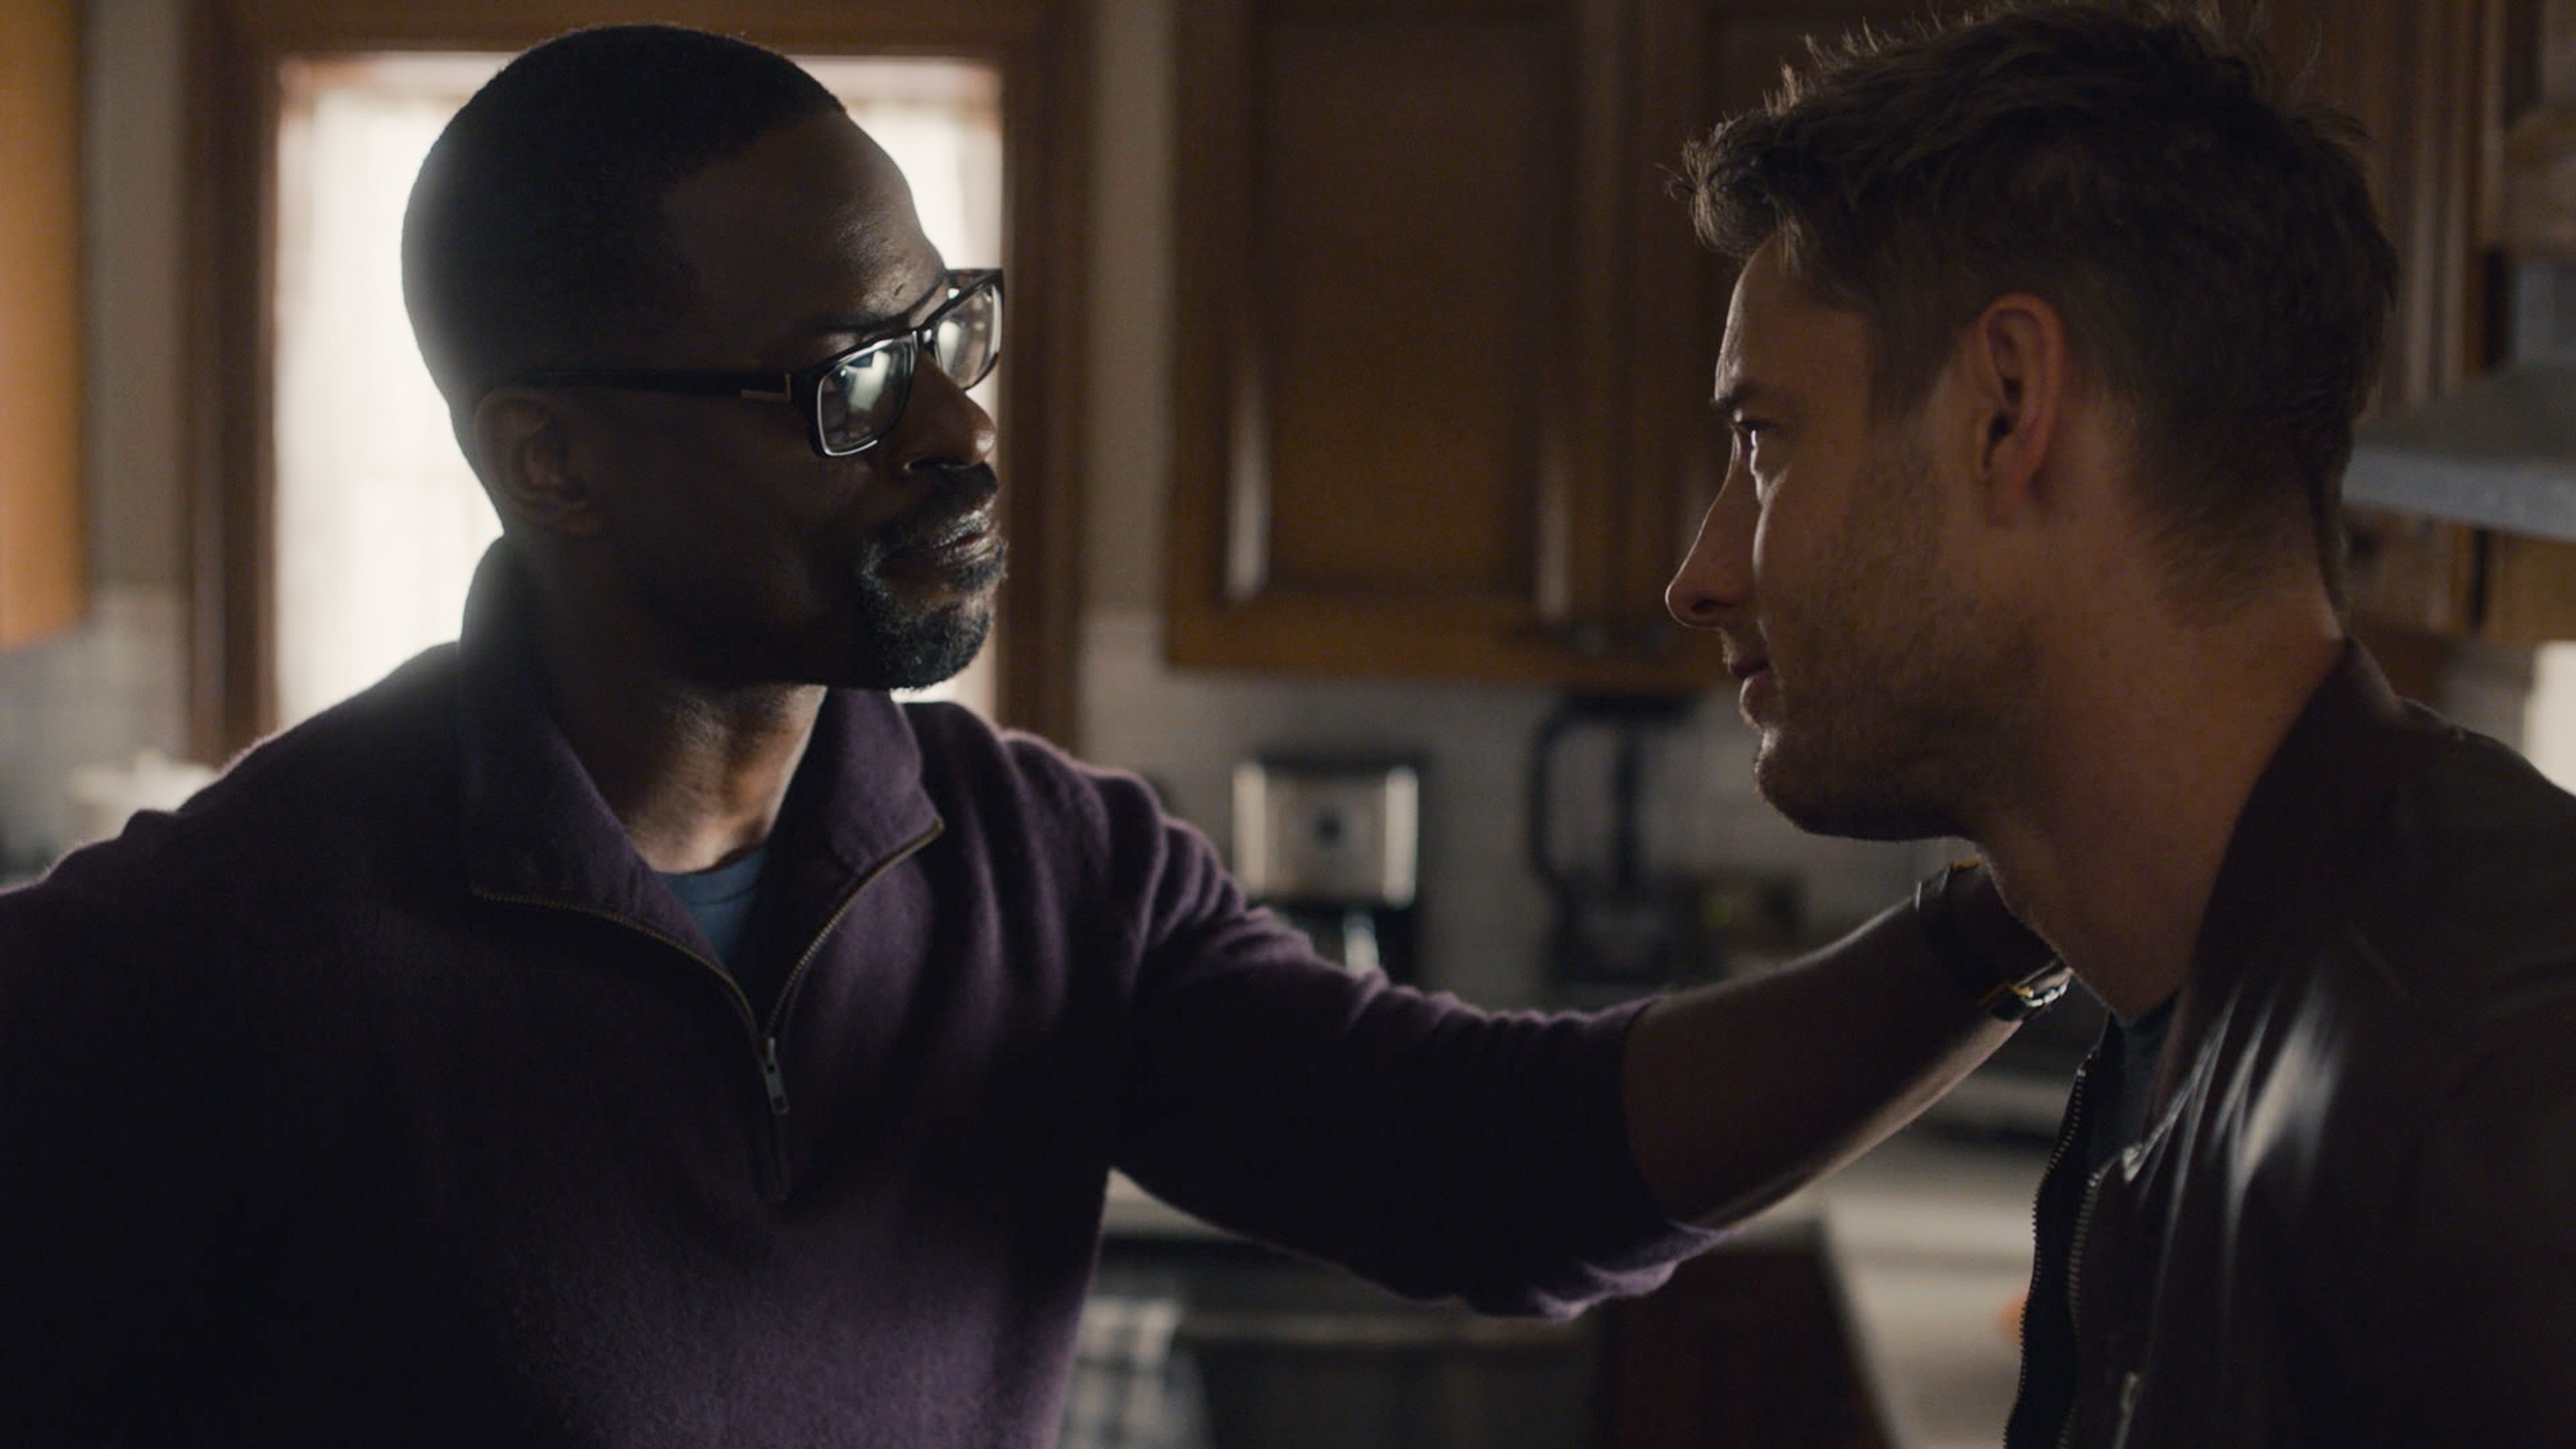 This Is Us Season 5 Episode 13 with Sterling K. Brown and Justin Hartley as Randall and Kevin